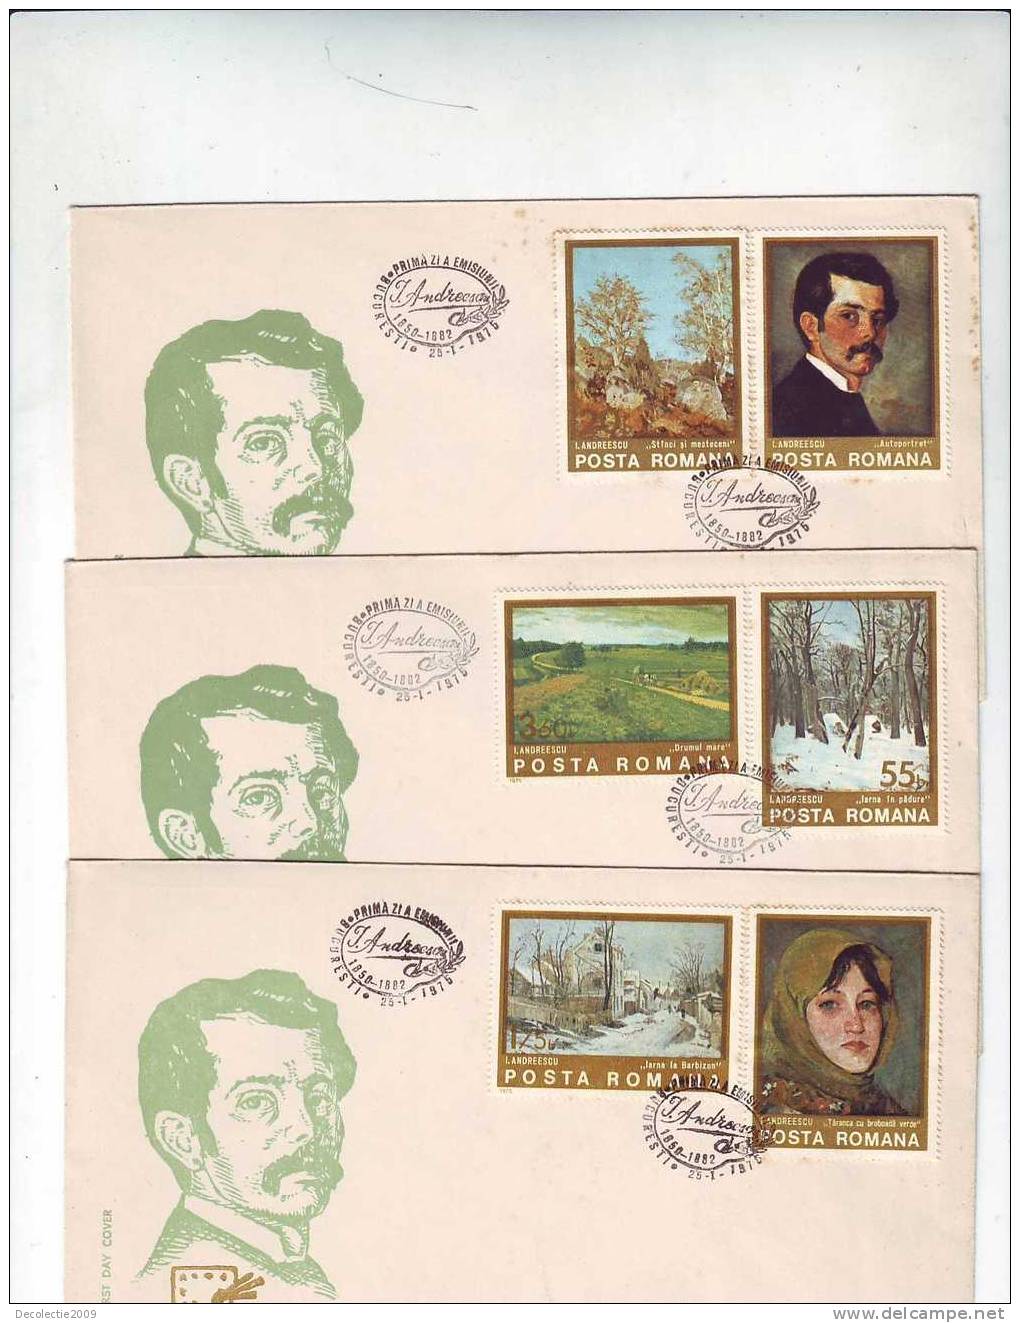 M518 FDC Romania Arts Ion Andreescu Paintings 3 Covers SET With Postmark Cancel 1975 !! - Impresionismo